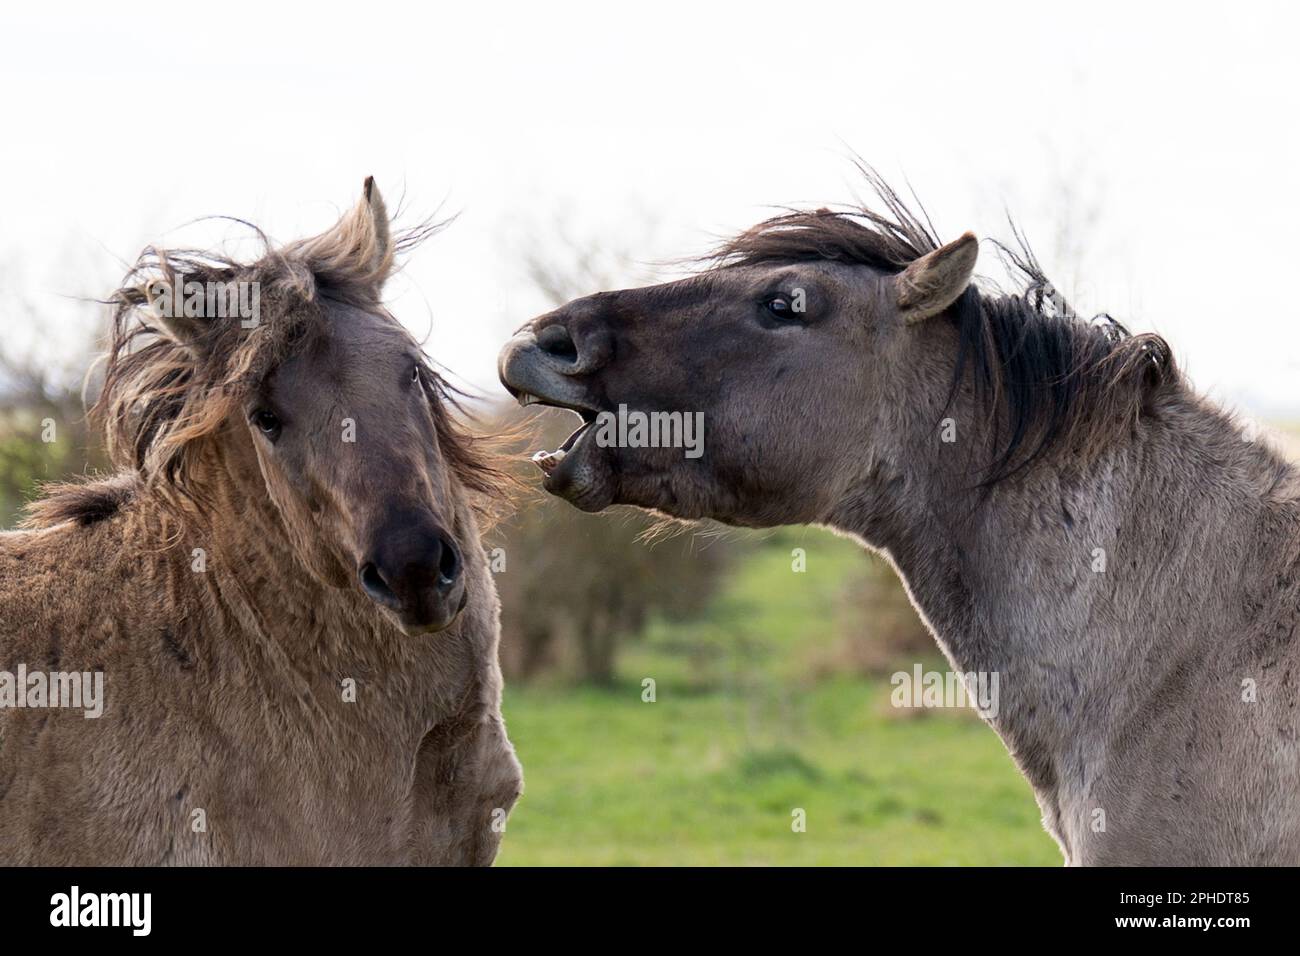 Konik ponies sparring at the National Trust's Wicken Fen nature reserve in Cambridgeshire. The grazing animals, a hardy breed originating from Poland, help to maintain 'one of Europe's most important wetlands' and attract new species of flora and fauna to the fen, leaving water-filled hoof prints and piles of dung as they go. Comprising one of only four fragments of undrained fen in the UK, Wicken Fen is a key habitat for thousands of species of flowers, insects and birds, playing an important ecological role by locking up carbon in its wet, peaty soil to reduce emissions and thereby helping c Stock Photo